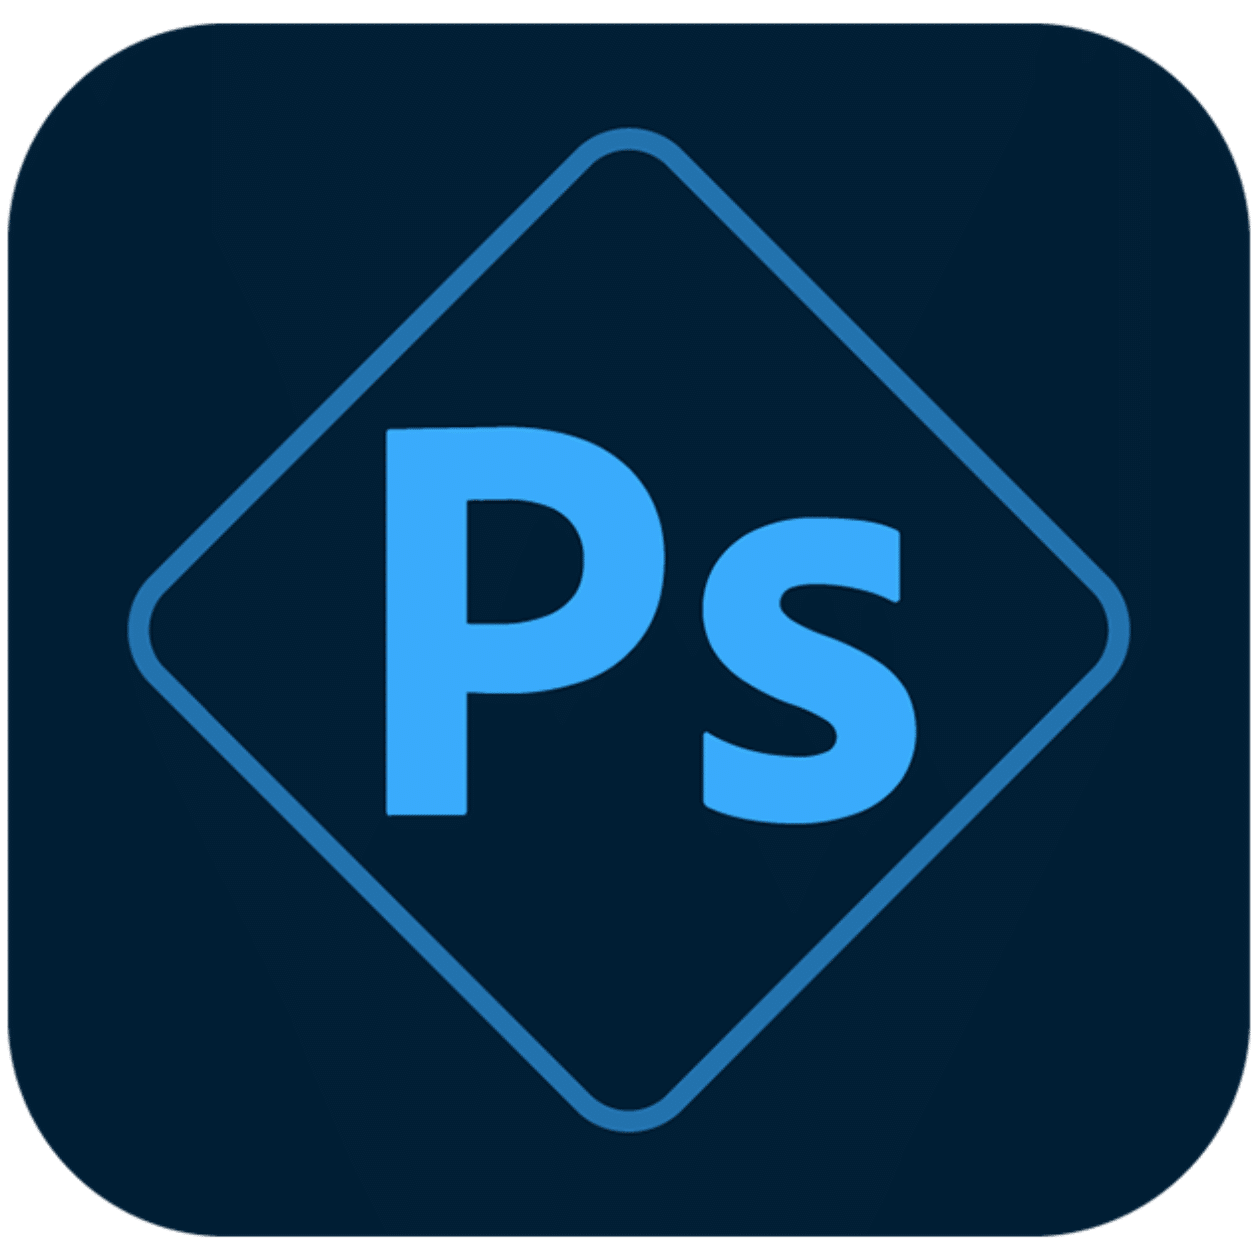 Adobe Photoshop Express 2022 For Windows Download Free